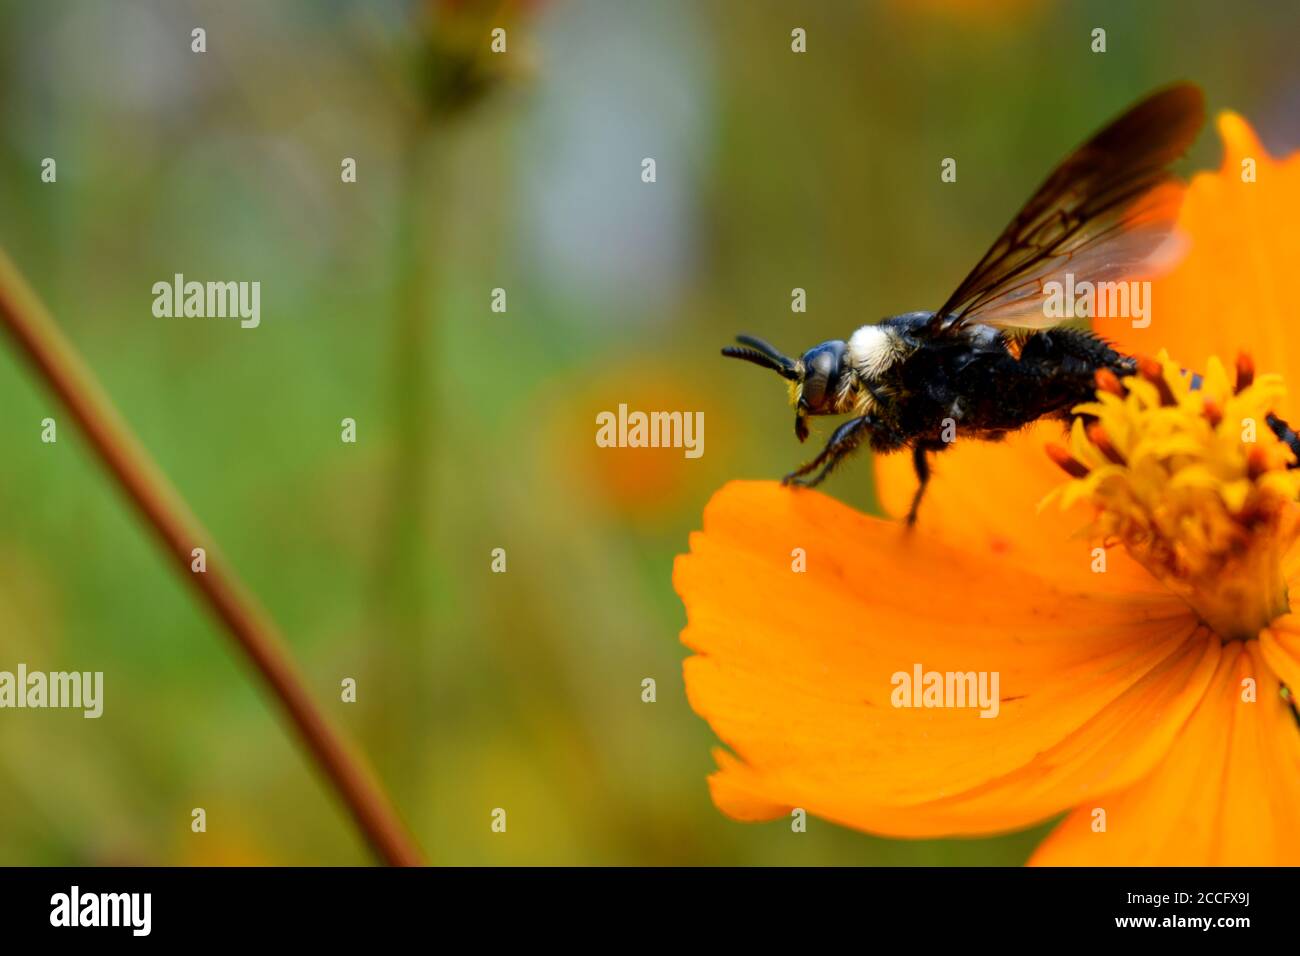 A mining bee perched on a cosmos flower. Stock Photo